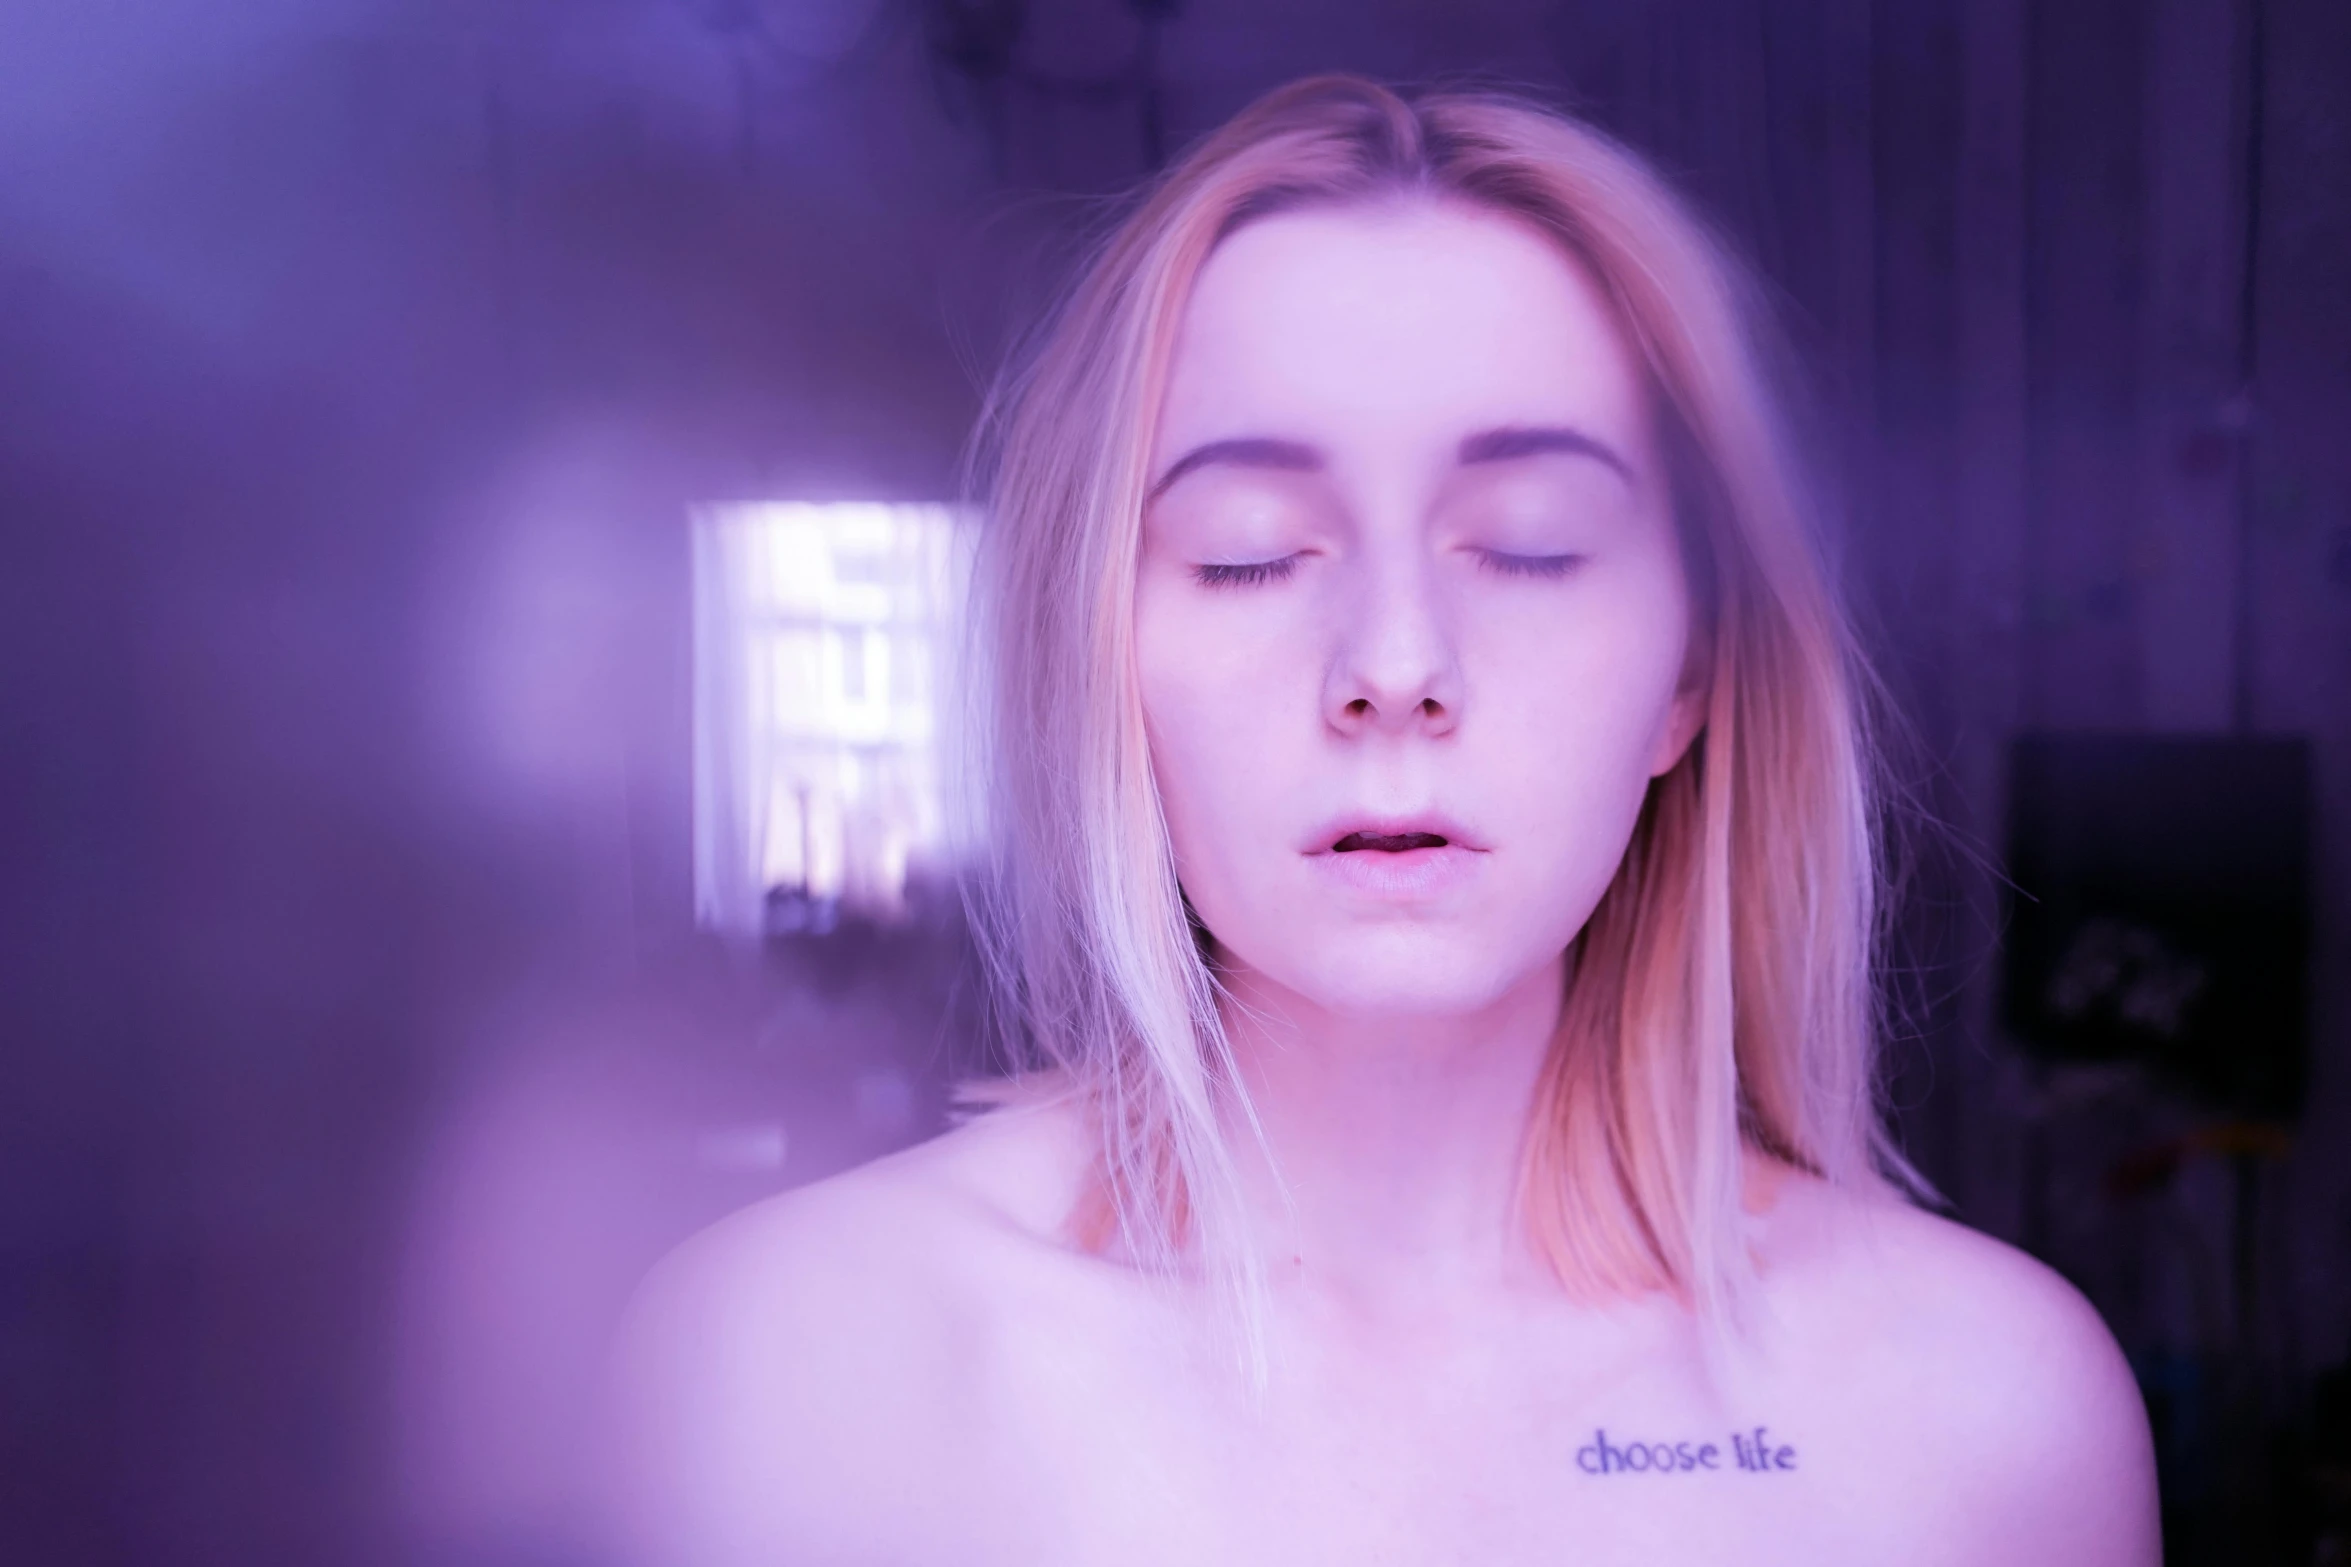 a woman with a tattoo on her chest, an album cover, inspired by Elsa Bleda, trending on pexels, aestheticism, brightly lit purple room, saoirse ronan, dreaming face, chloe grace moretz